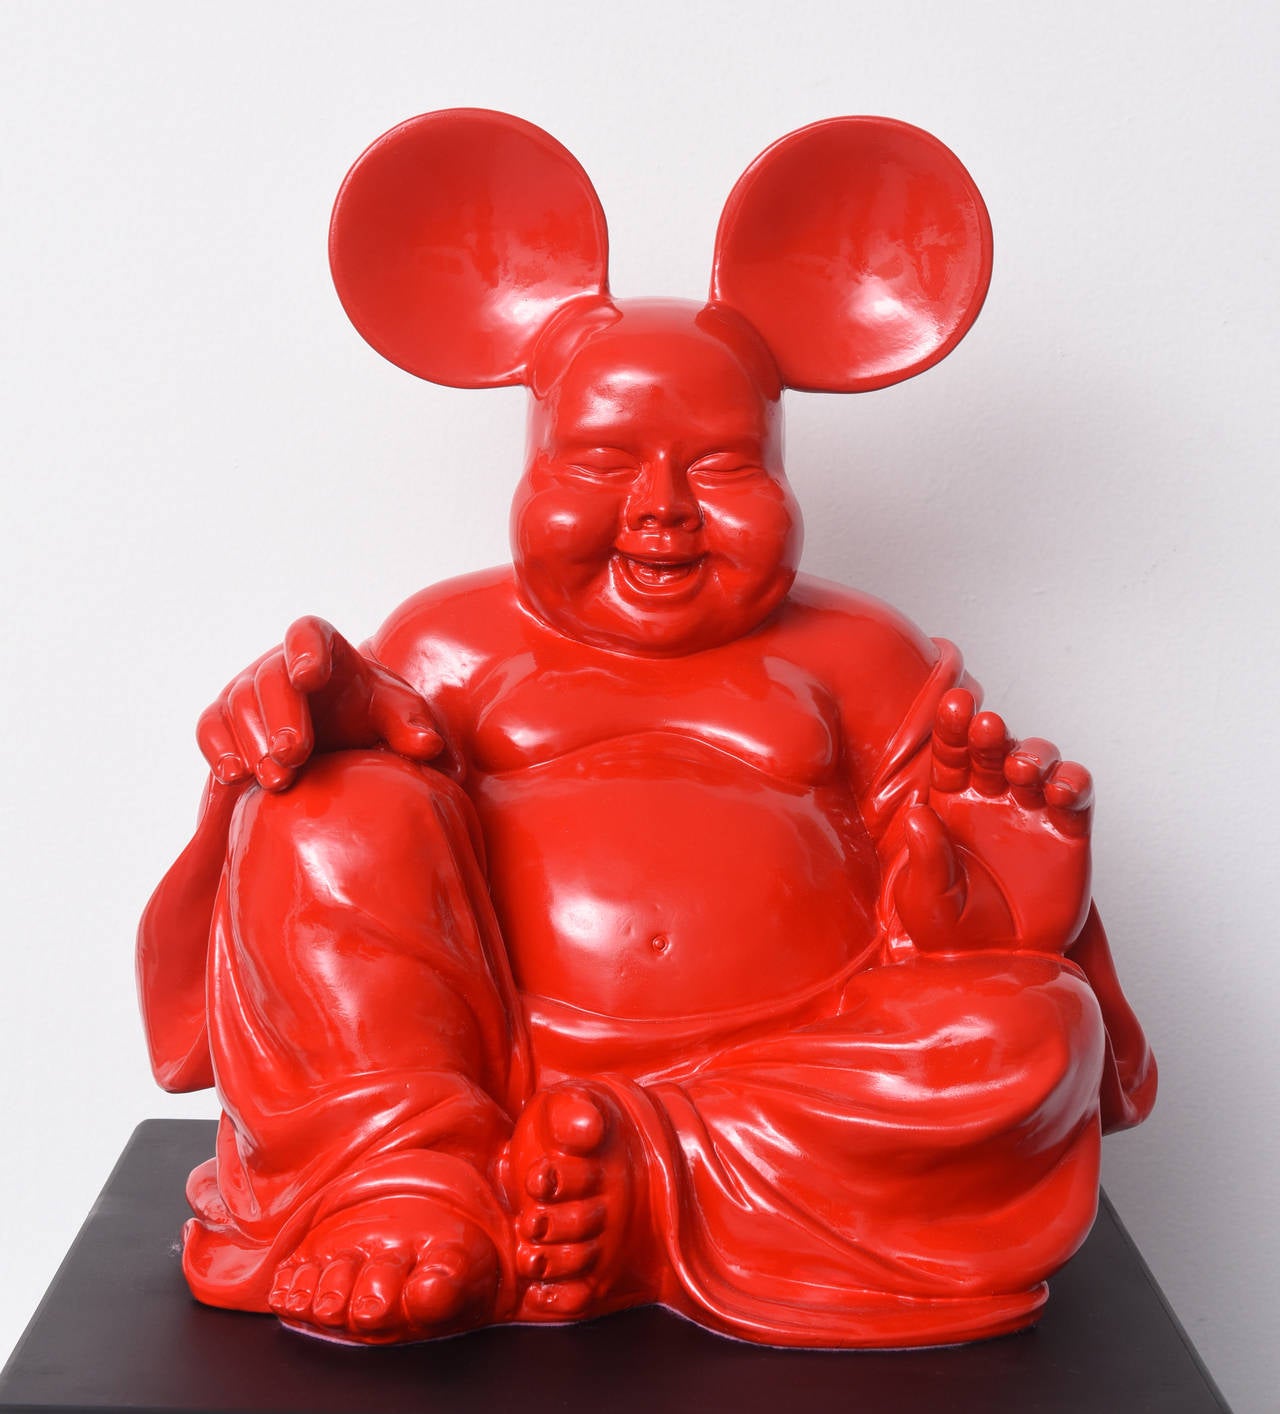 Red Boud'key - Fusion of Buddha and Mickey - Resin sculpture - Sculpture by Patrick Schumacher